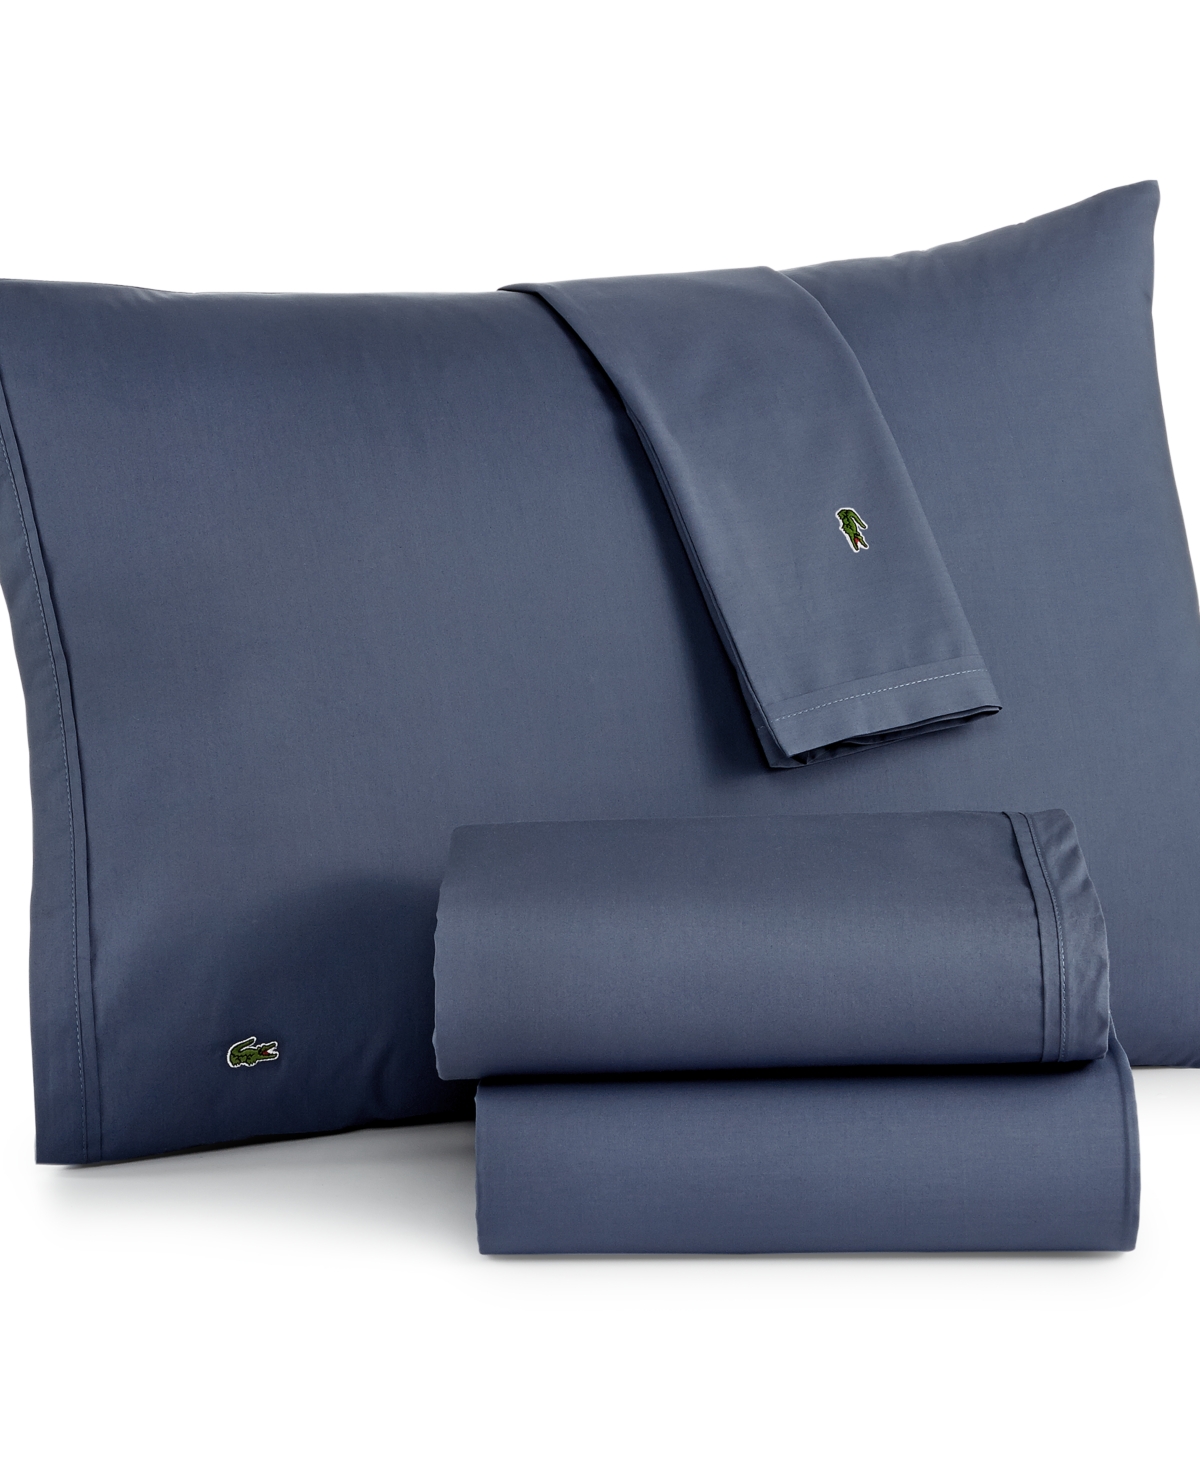 Lacoste Home Solid Cotton Percale Sheet Set, California King In Vintage Indigo